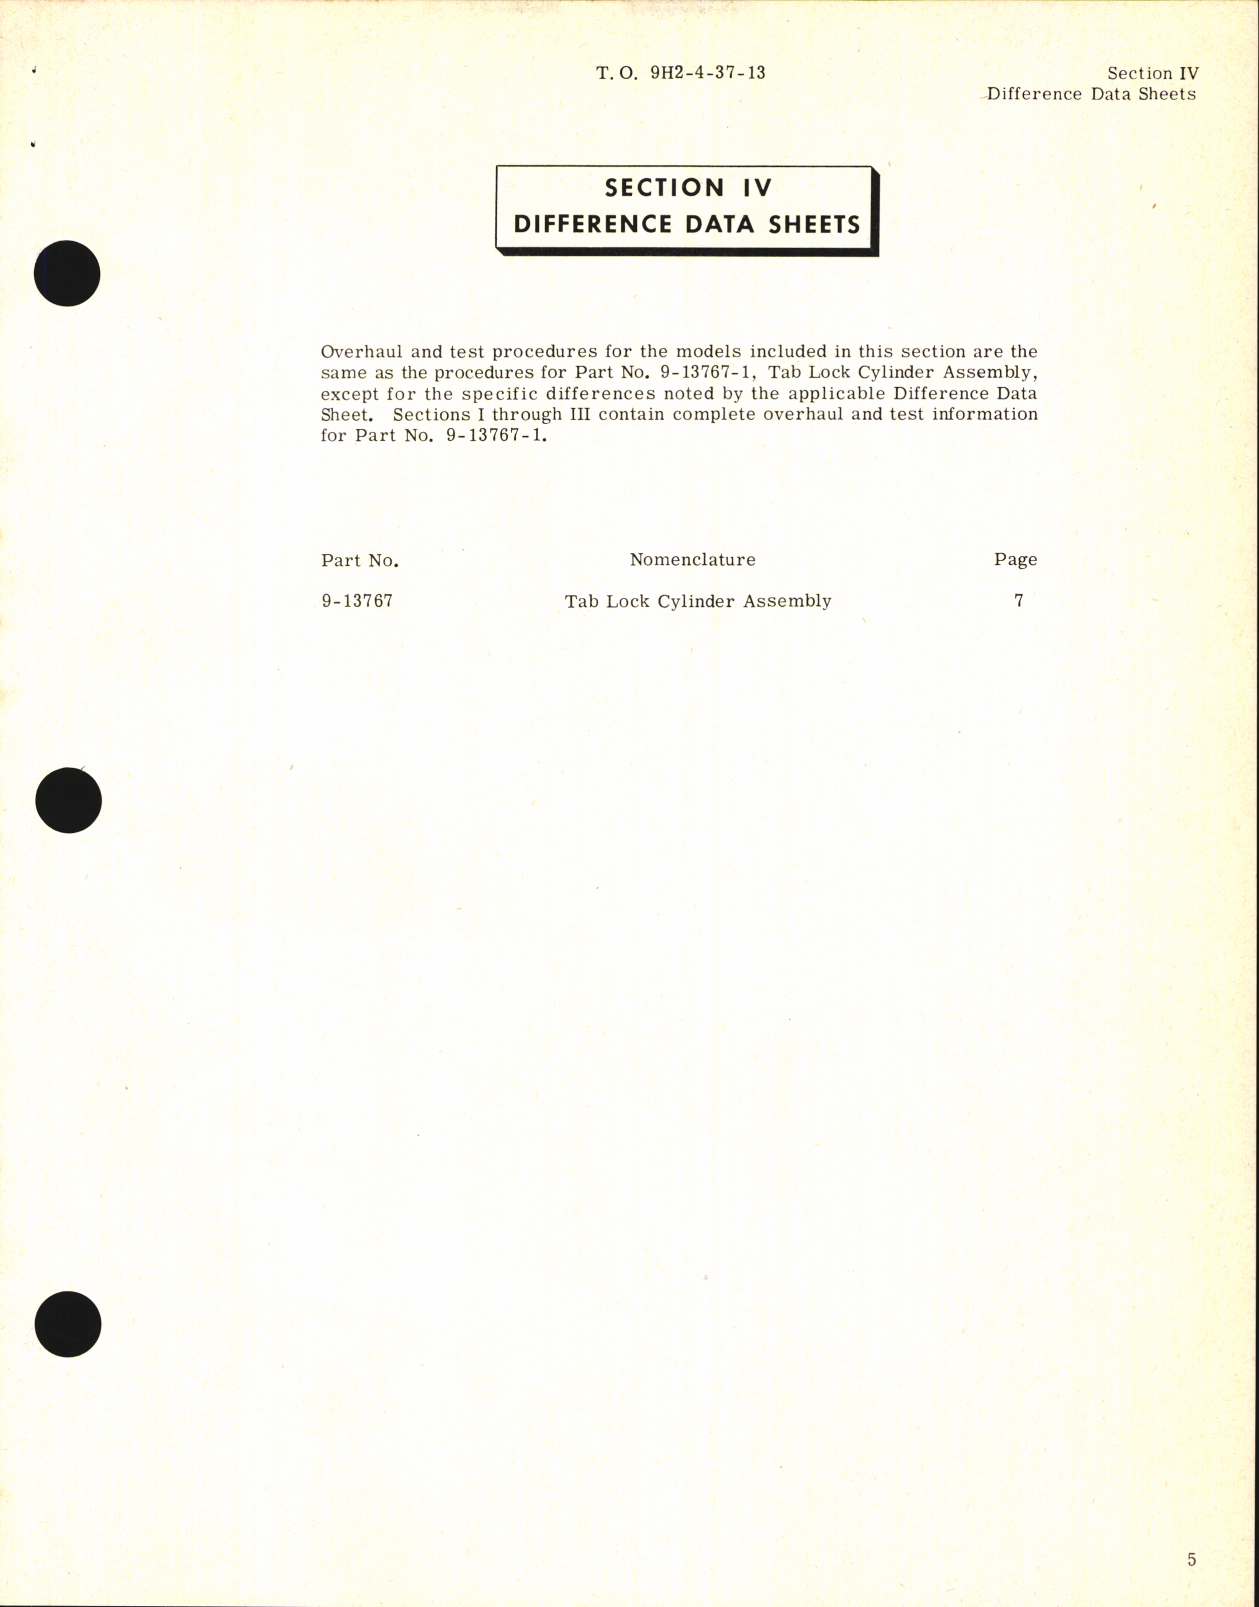 Sample page 5 from AirCorps Library document: Overhaul Instructions for Tab Lock Cylinder Assemblies